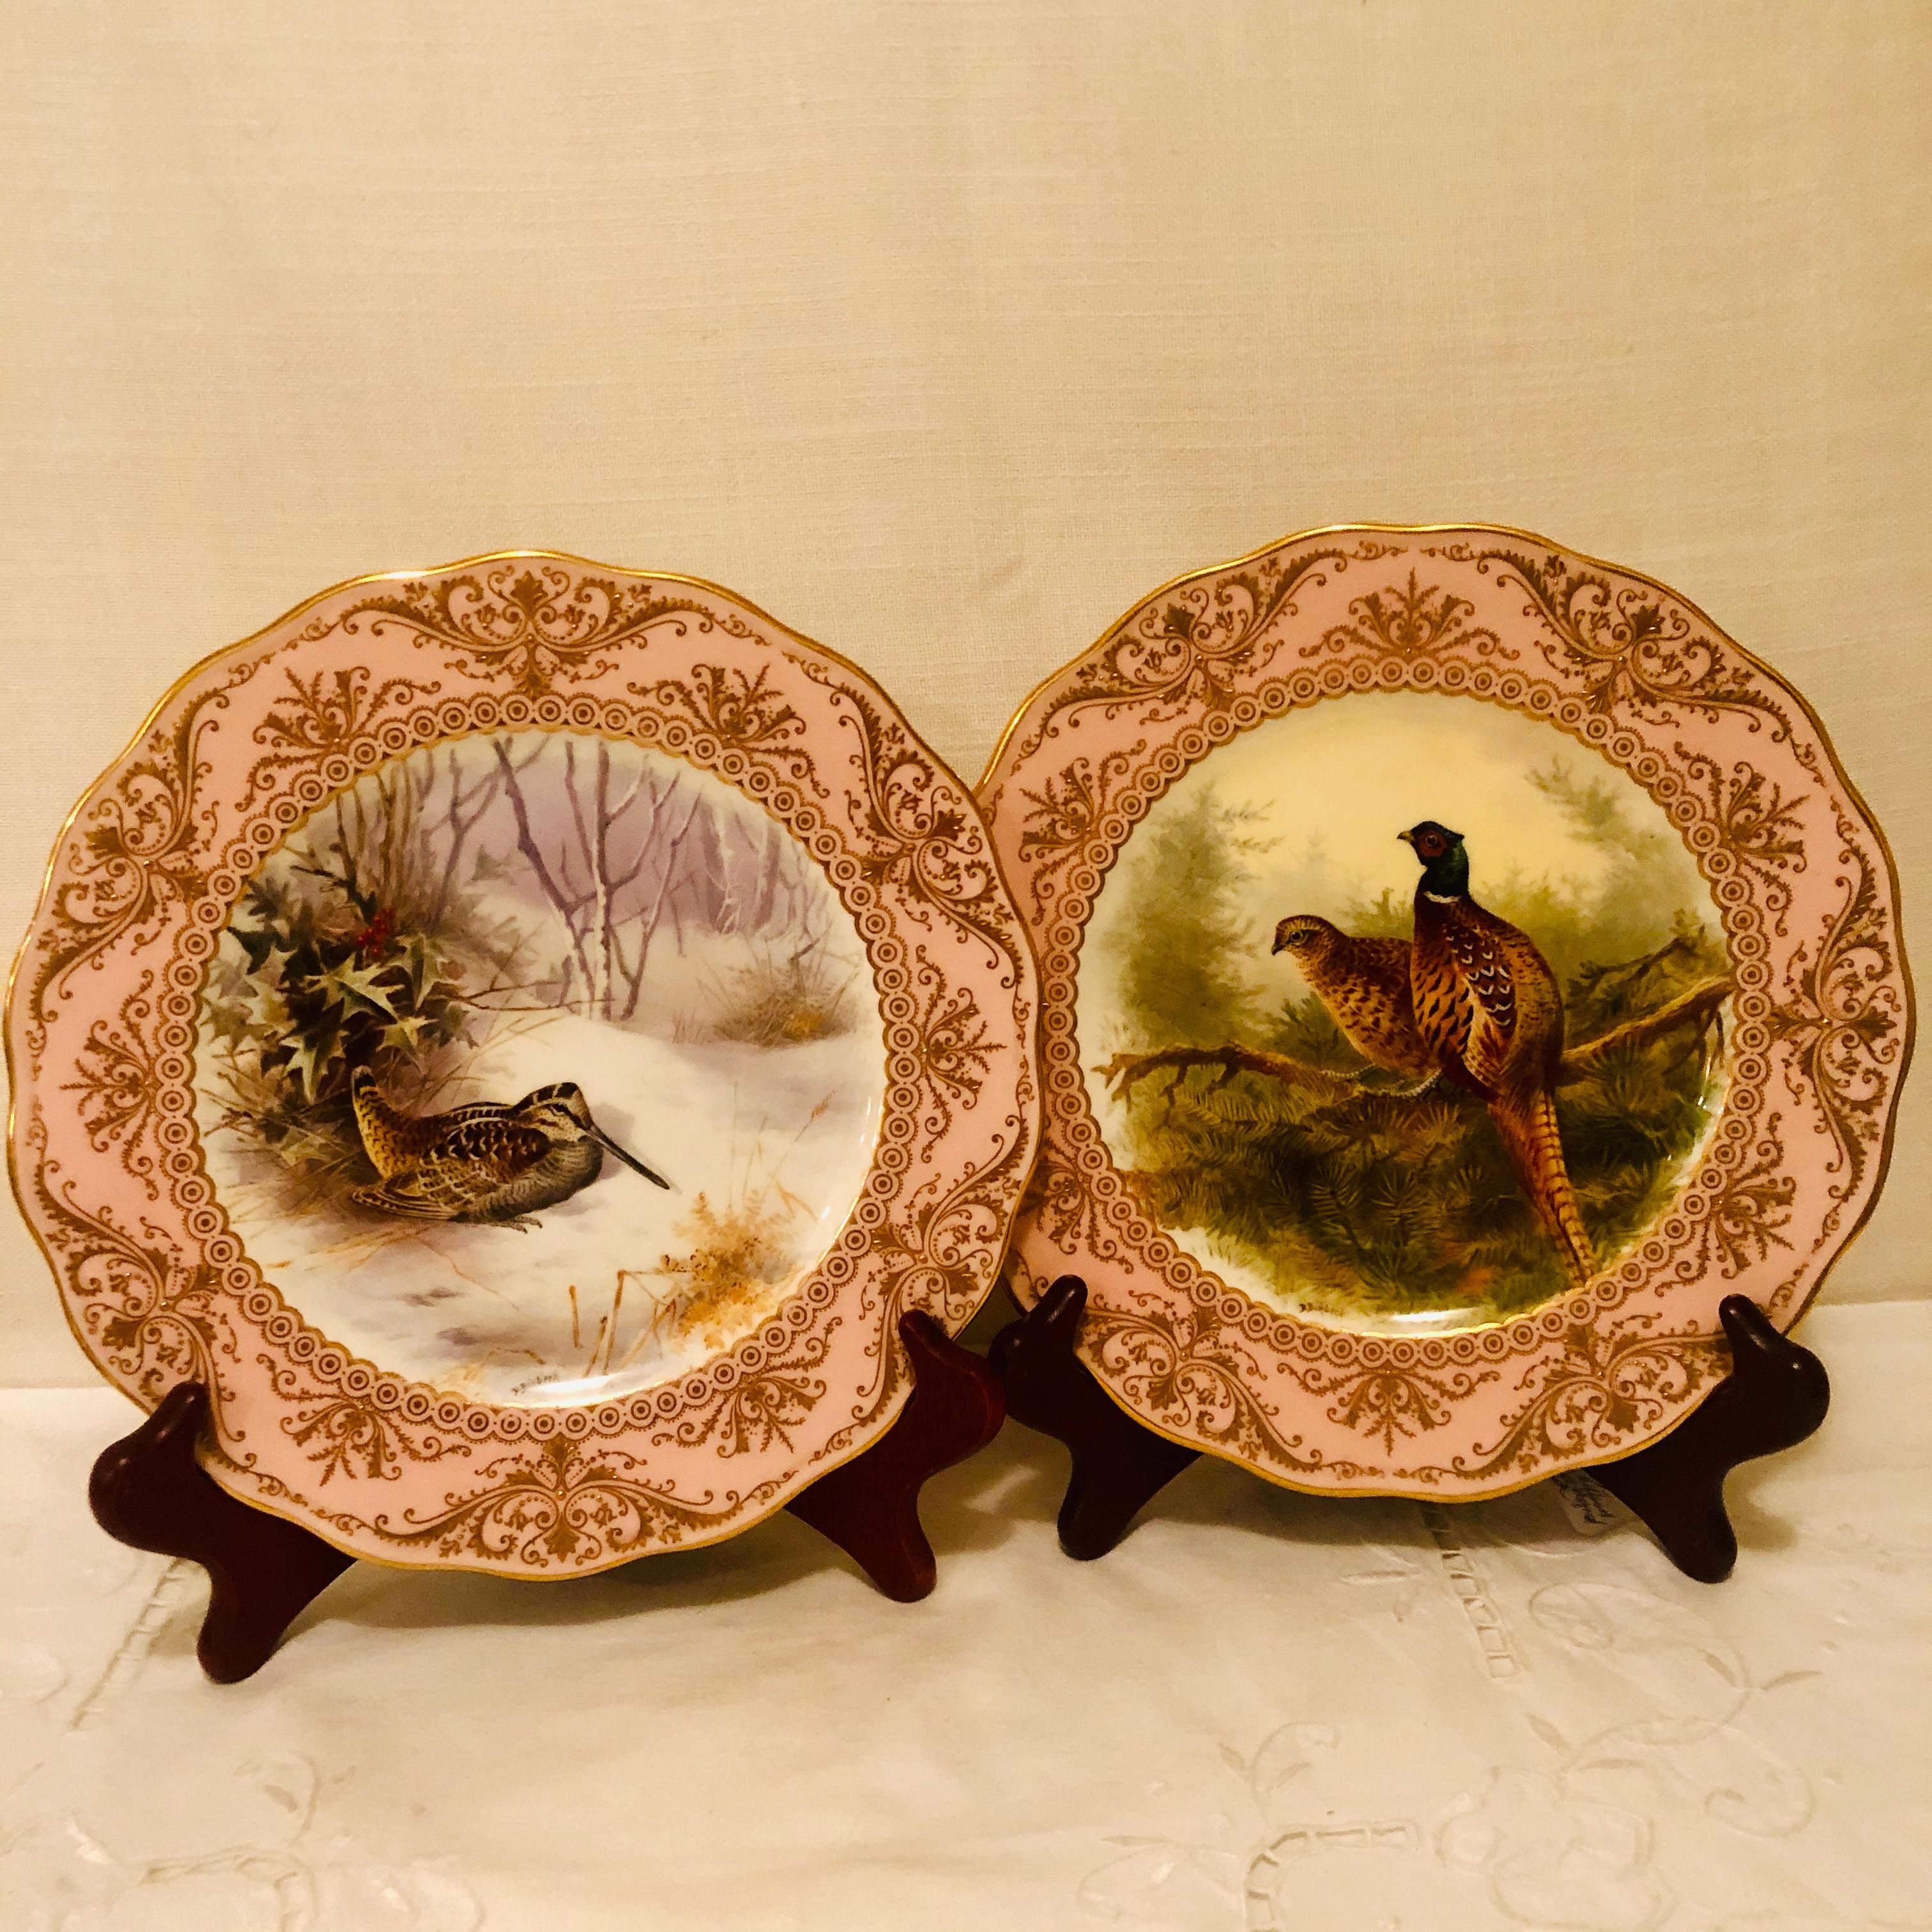 Look at the artwork on this set of twelve Cauldon artist signed D. Birbeck English bird plates with raised gilding around the borders. D. Birbeck was a renown English porcelain artist, who worked at Cauldon until 1911. These plates are from circa